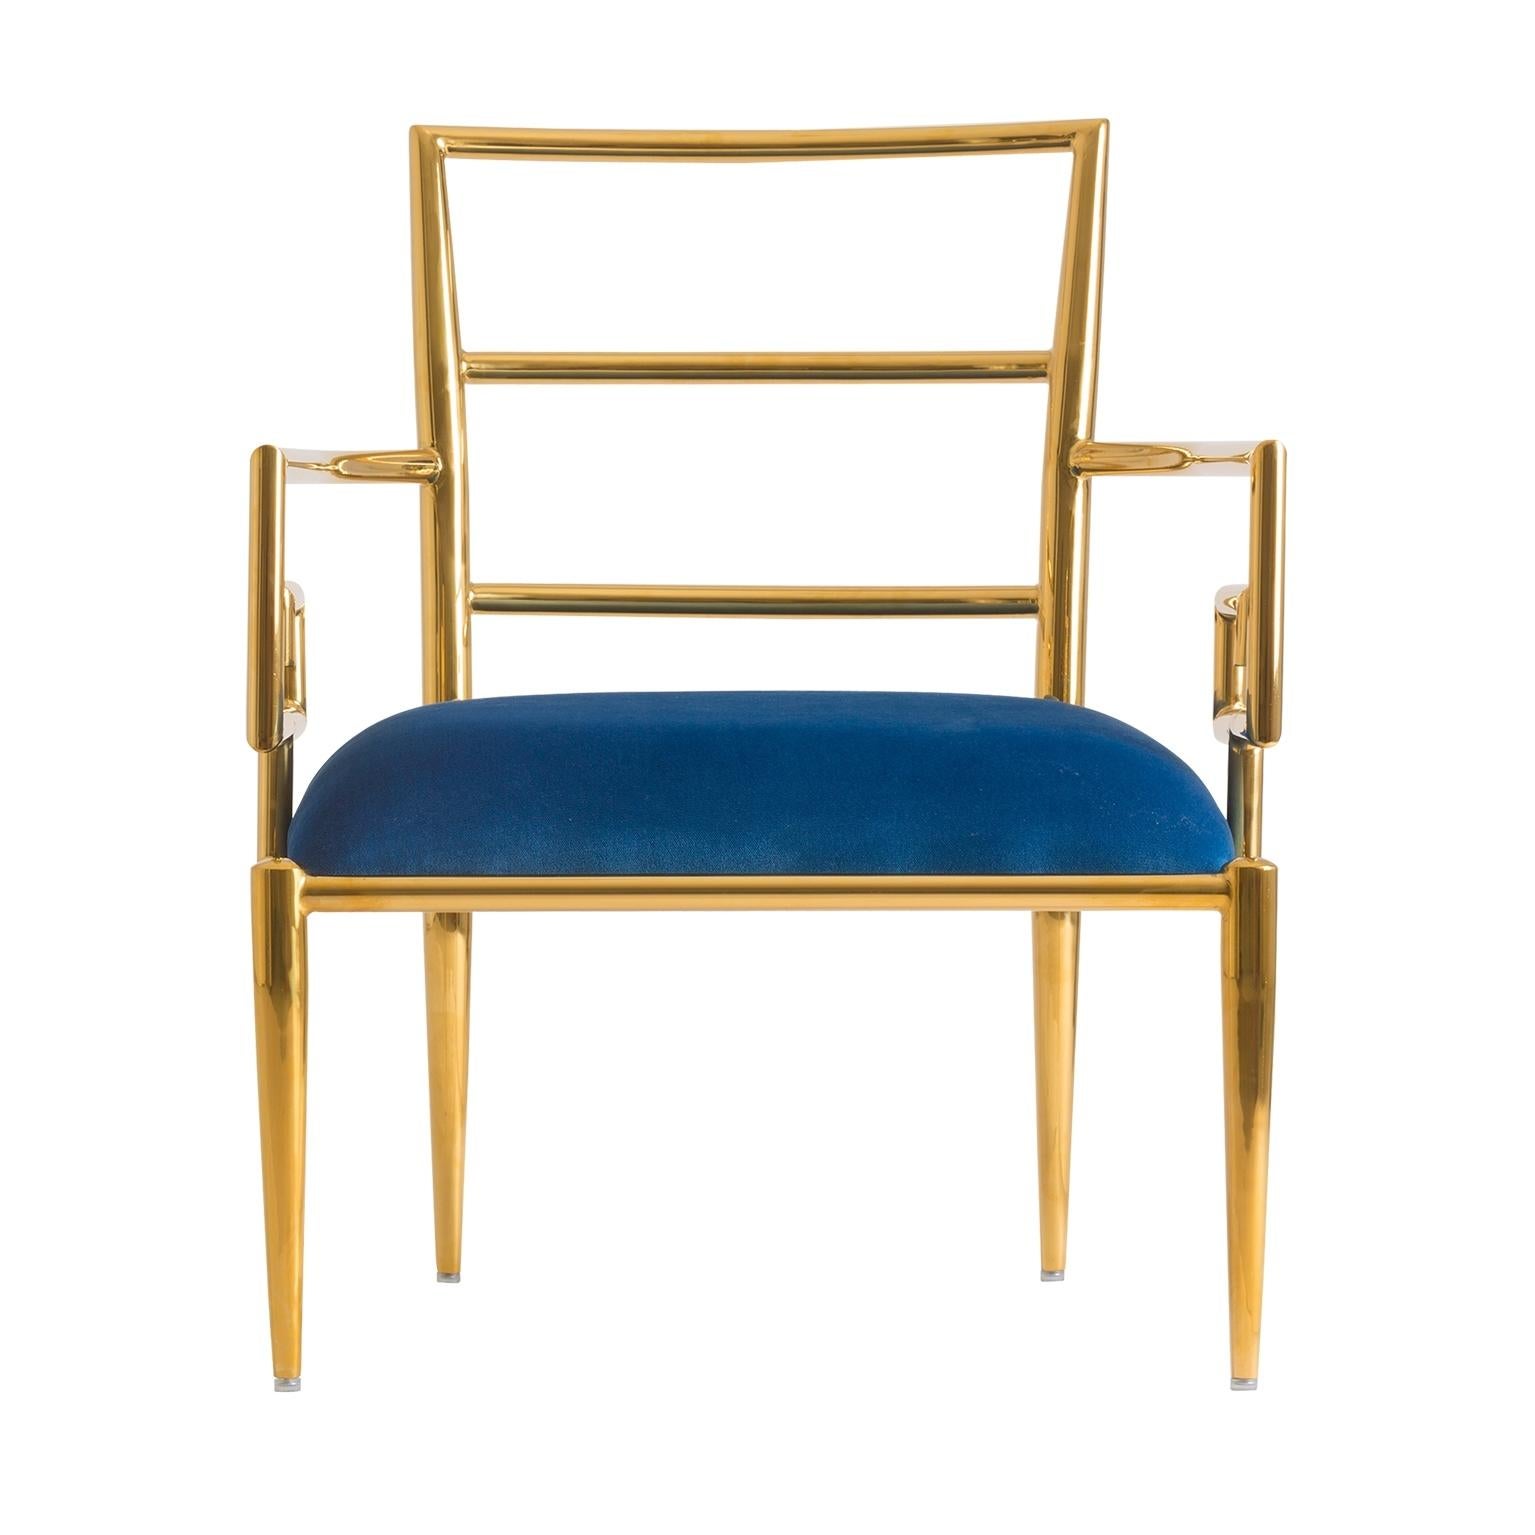 Two armchairs in azure blue velvet and gilded metal with outstanding shape, comfortable, and so trendy!